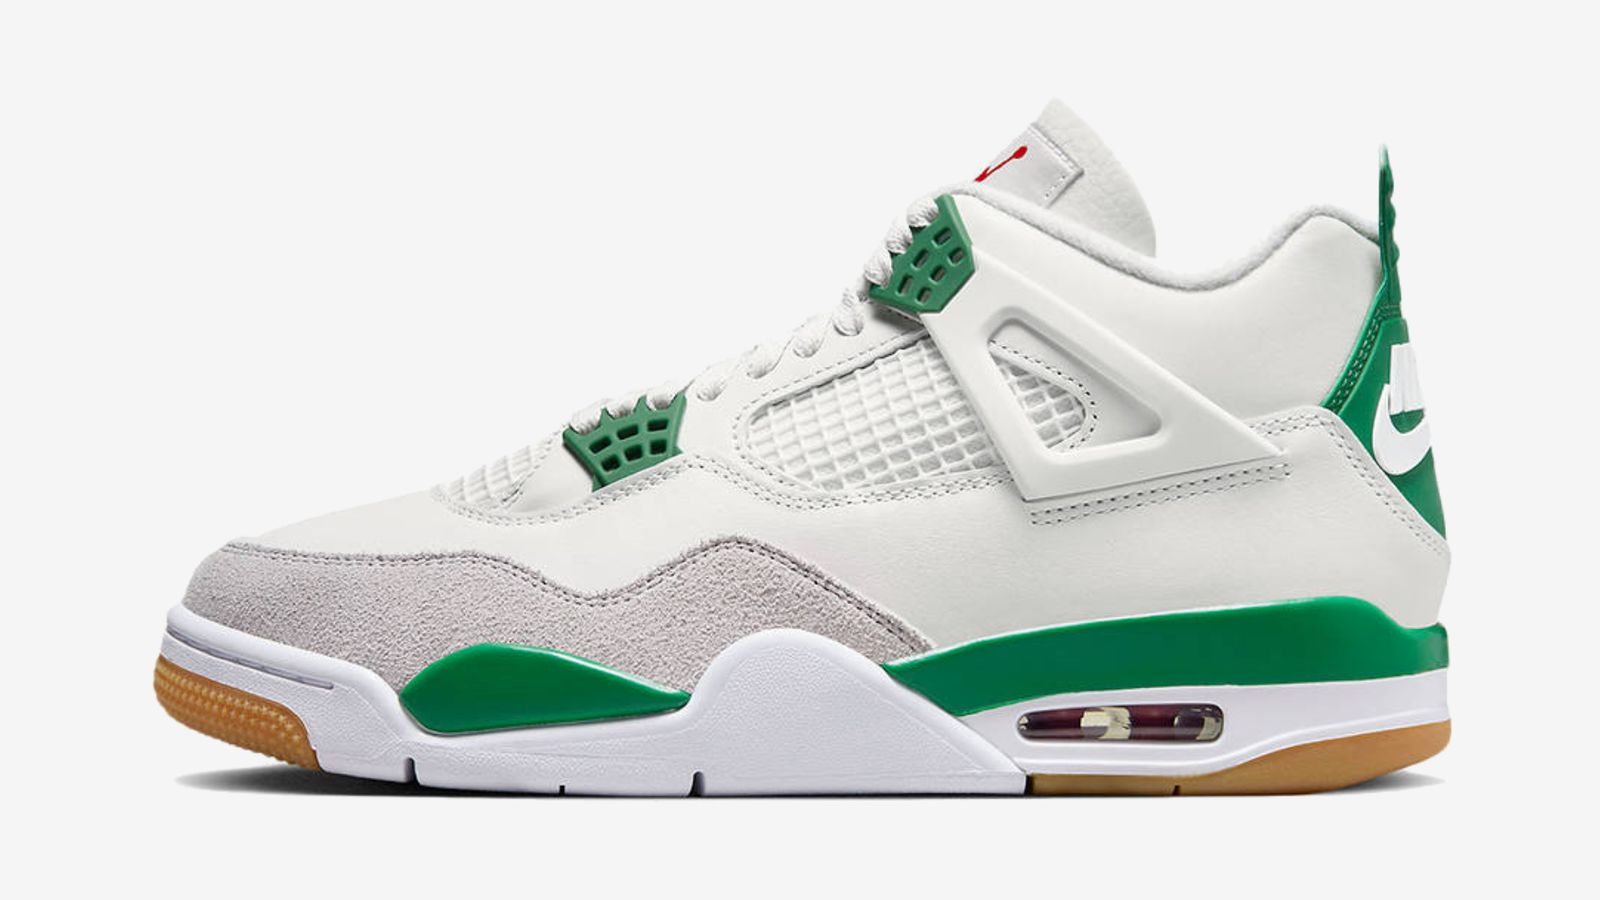 Nike SB x Air Jordan 4 "Pine Green" product image of a white and grey suede sneaker with Pine Green accents.